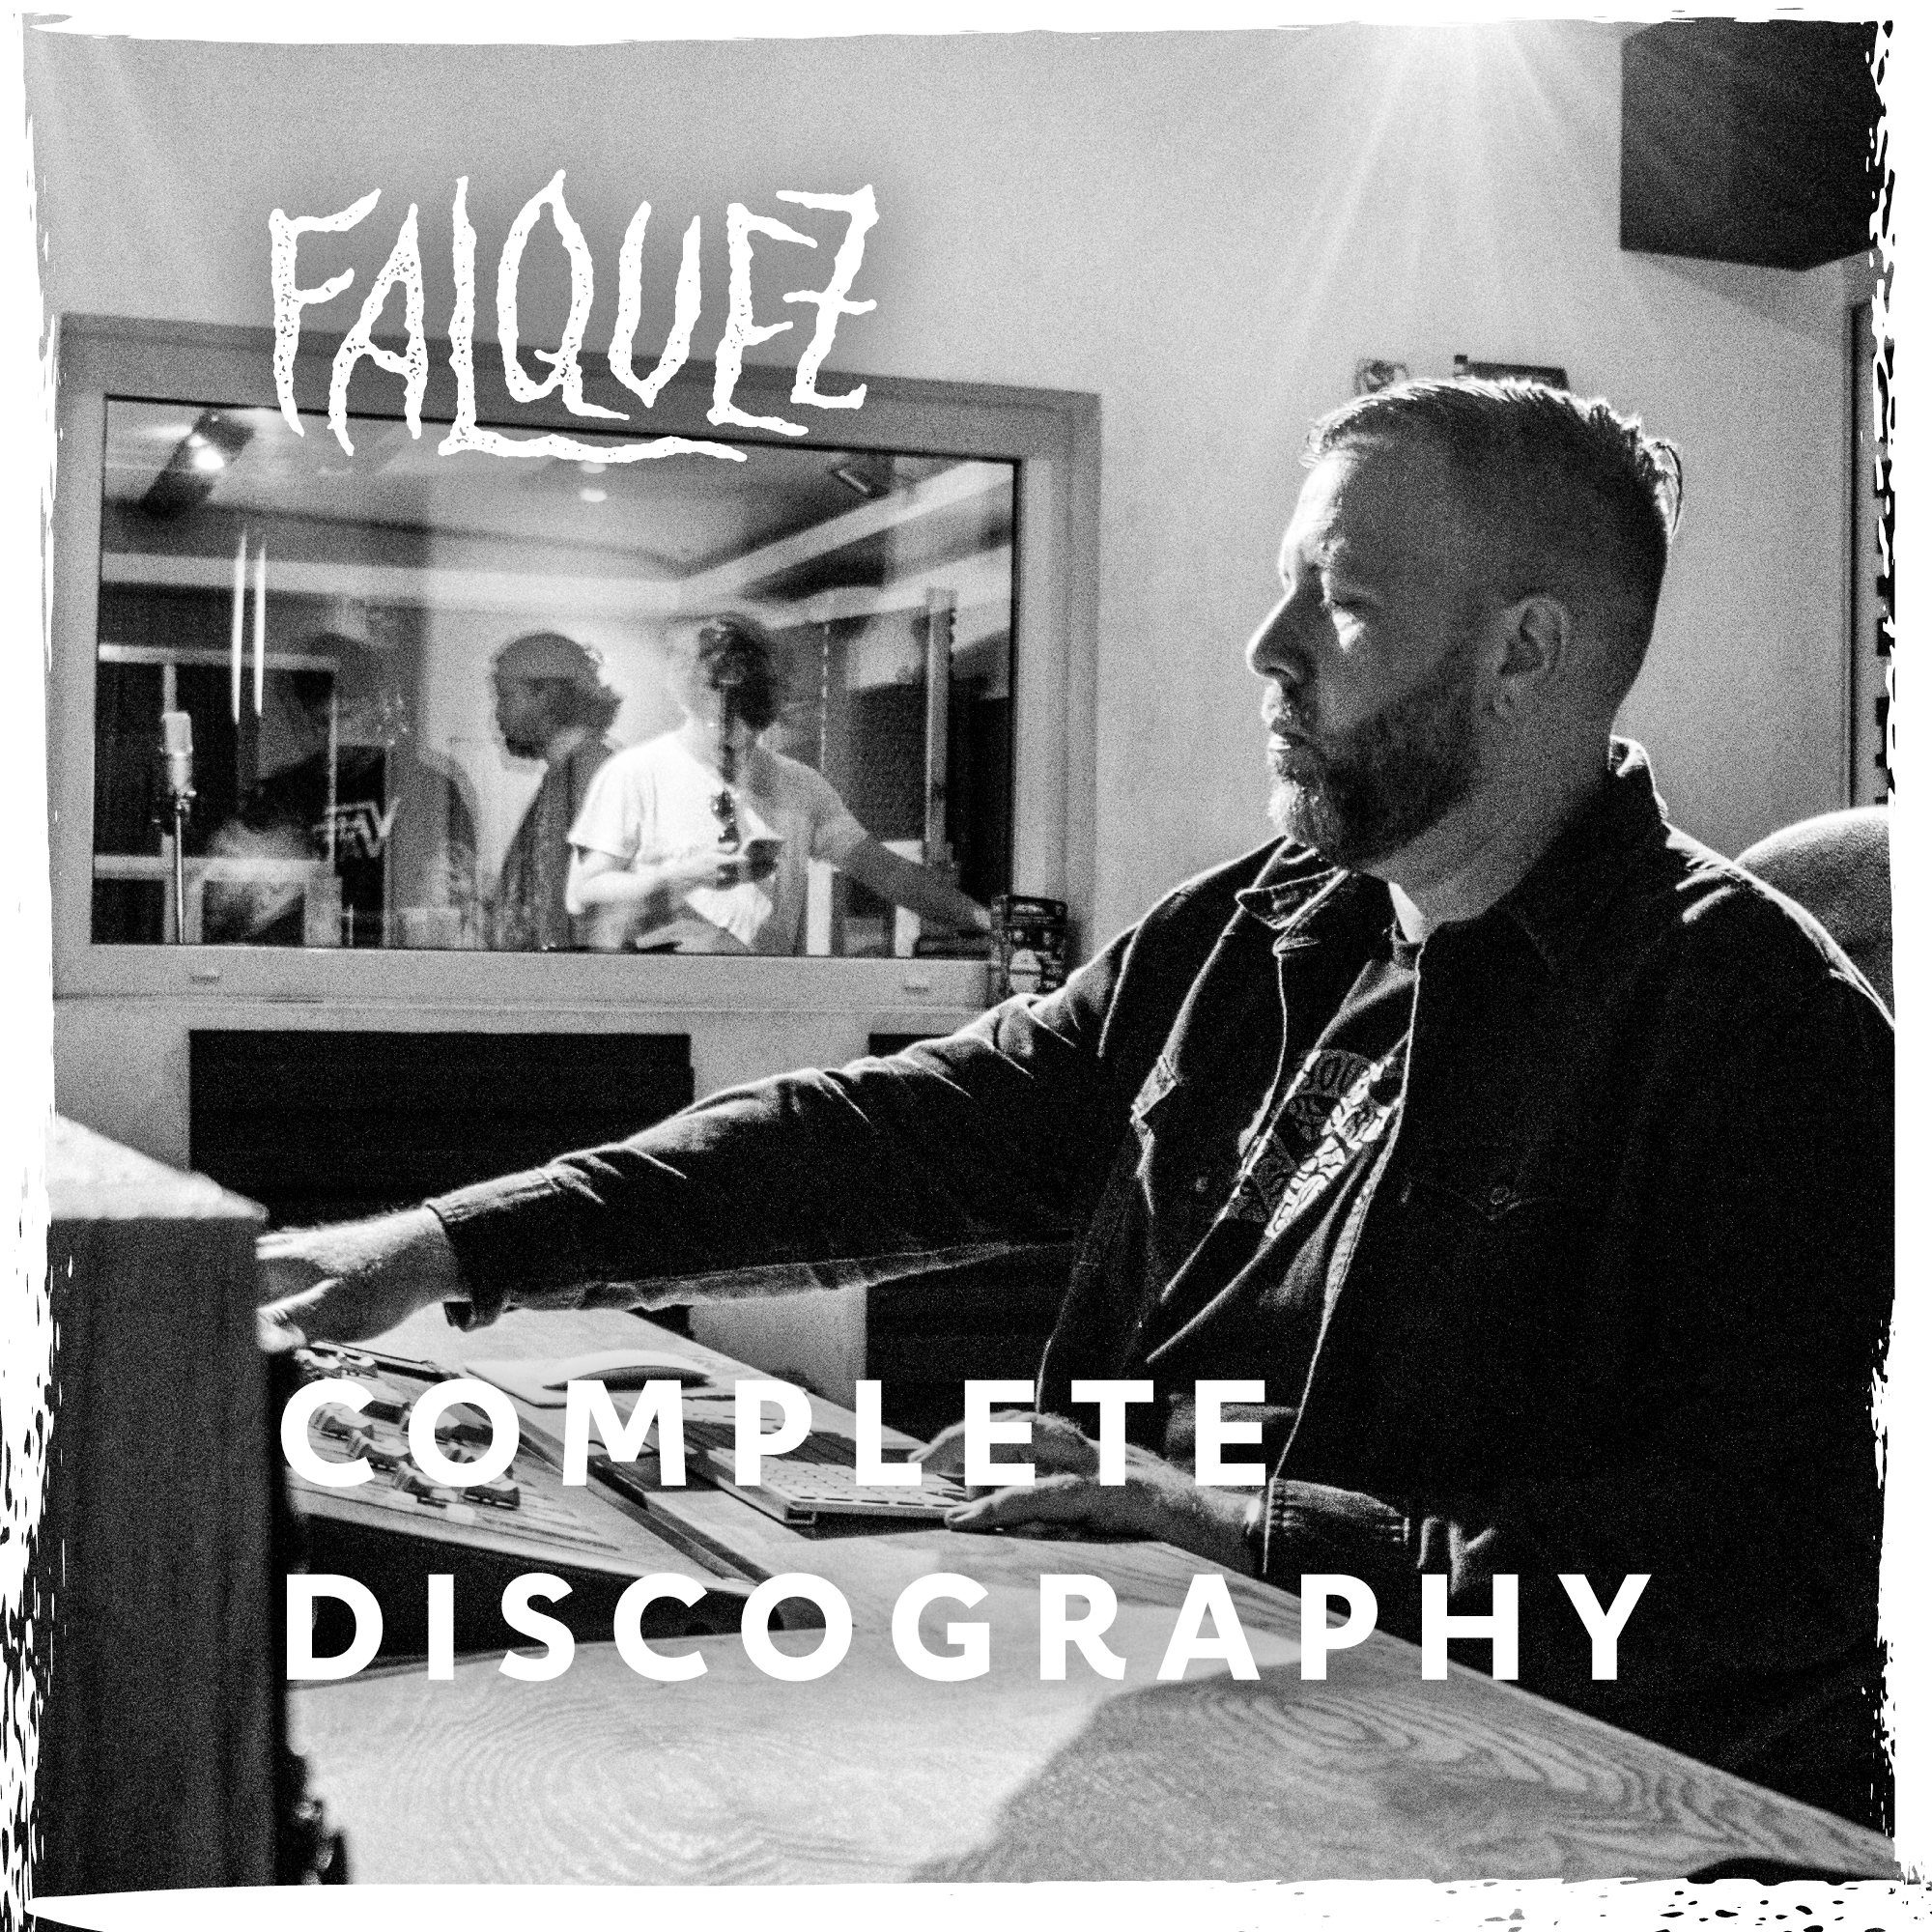 The complete discography of Falquez. The playlist is available on Spotify, Apple Music, Deezer and YouTube